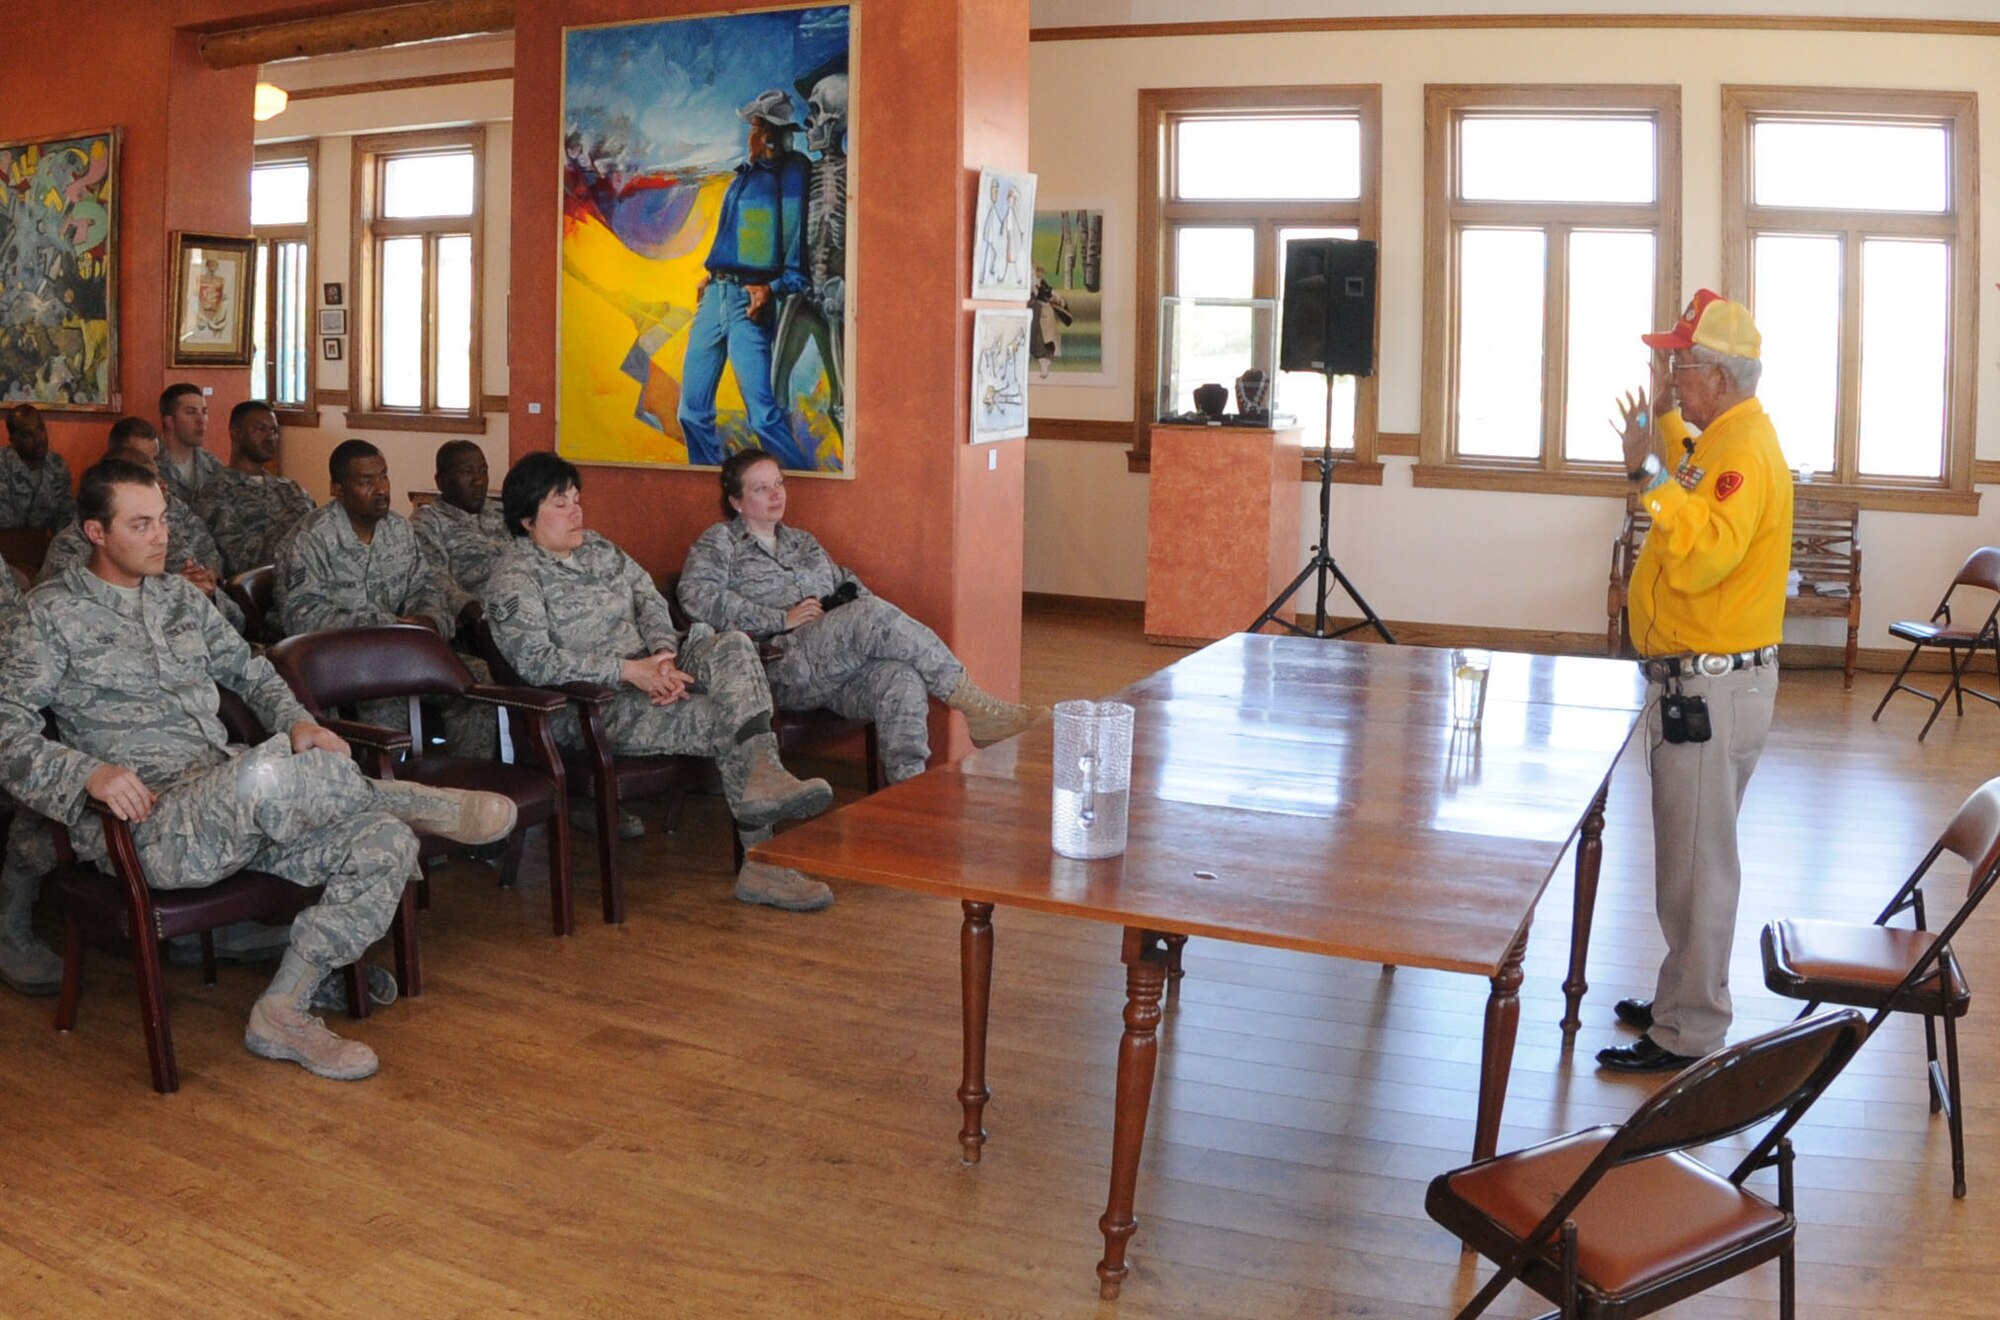 Bill Toledo, an original Navajo "Code-Talker" from World War II, speaks about his experiences during the war, to members of the 113th Civil Engineer Squadron (113 CES), District of Columbia Air National Guard, in Gallup, N.M., June 2, 2011.  The 113th CES members are in Window Rock, Ariz., as part of the Innovative Readiness Training, a civil-military affairs program linking military units with civilian communities for humanitarian projects.  (U.S. Air Force Photo by Tech Sgt. Craig Clapper)   